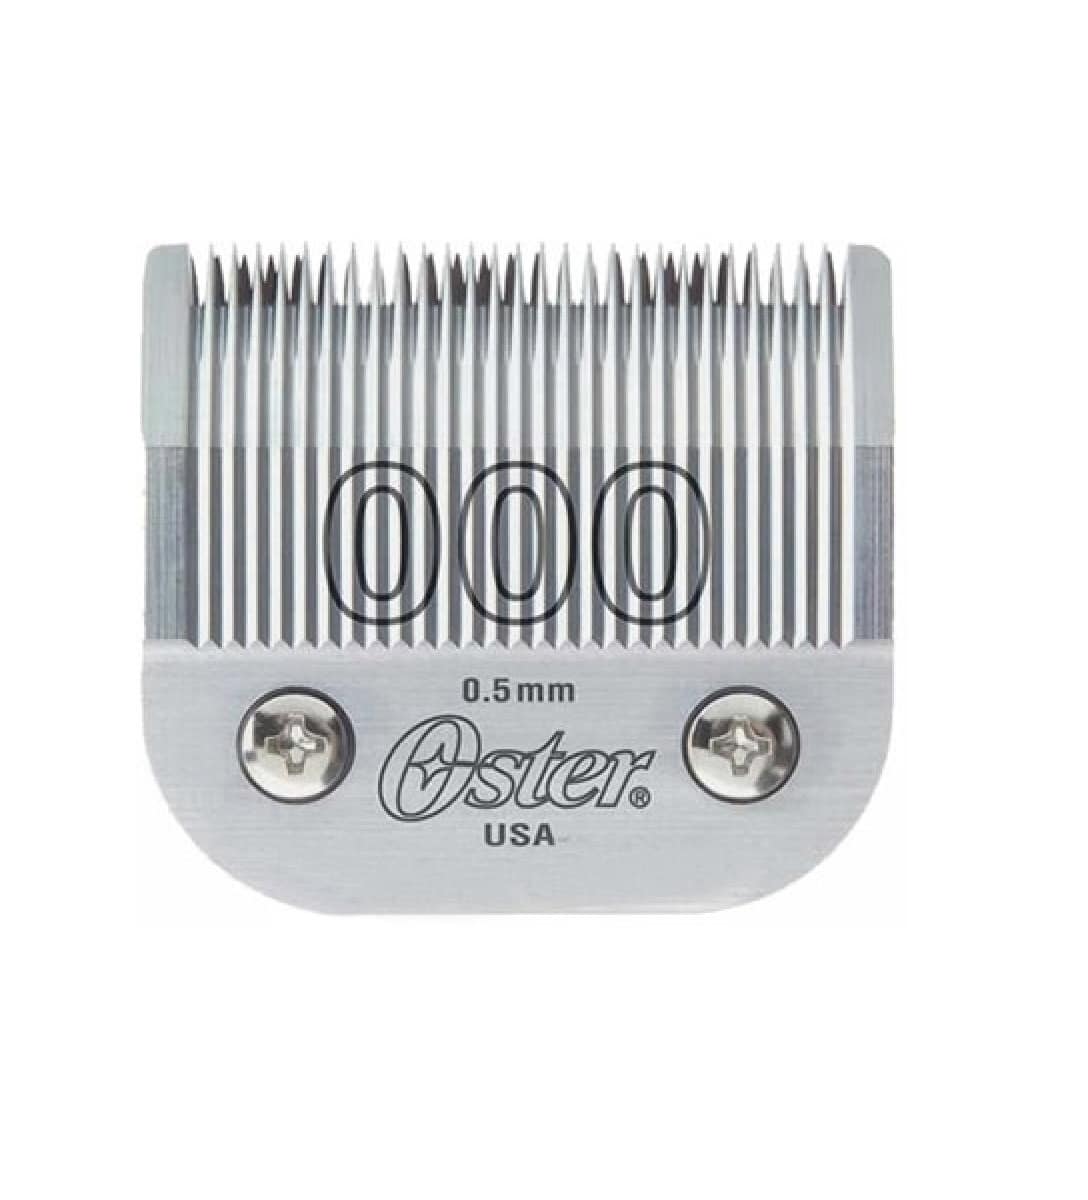 Oster 76 AgION Blade Size 000 #76918-026 - Barber supplies